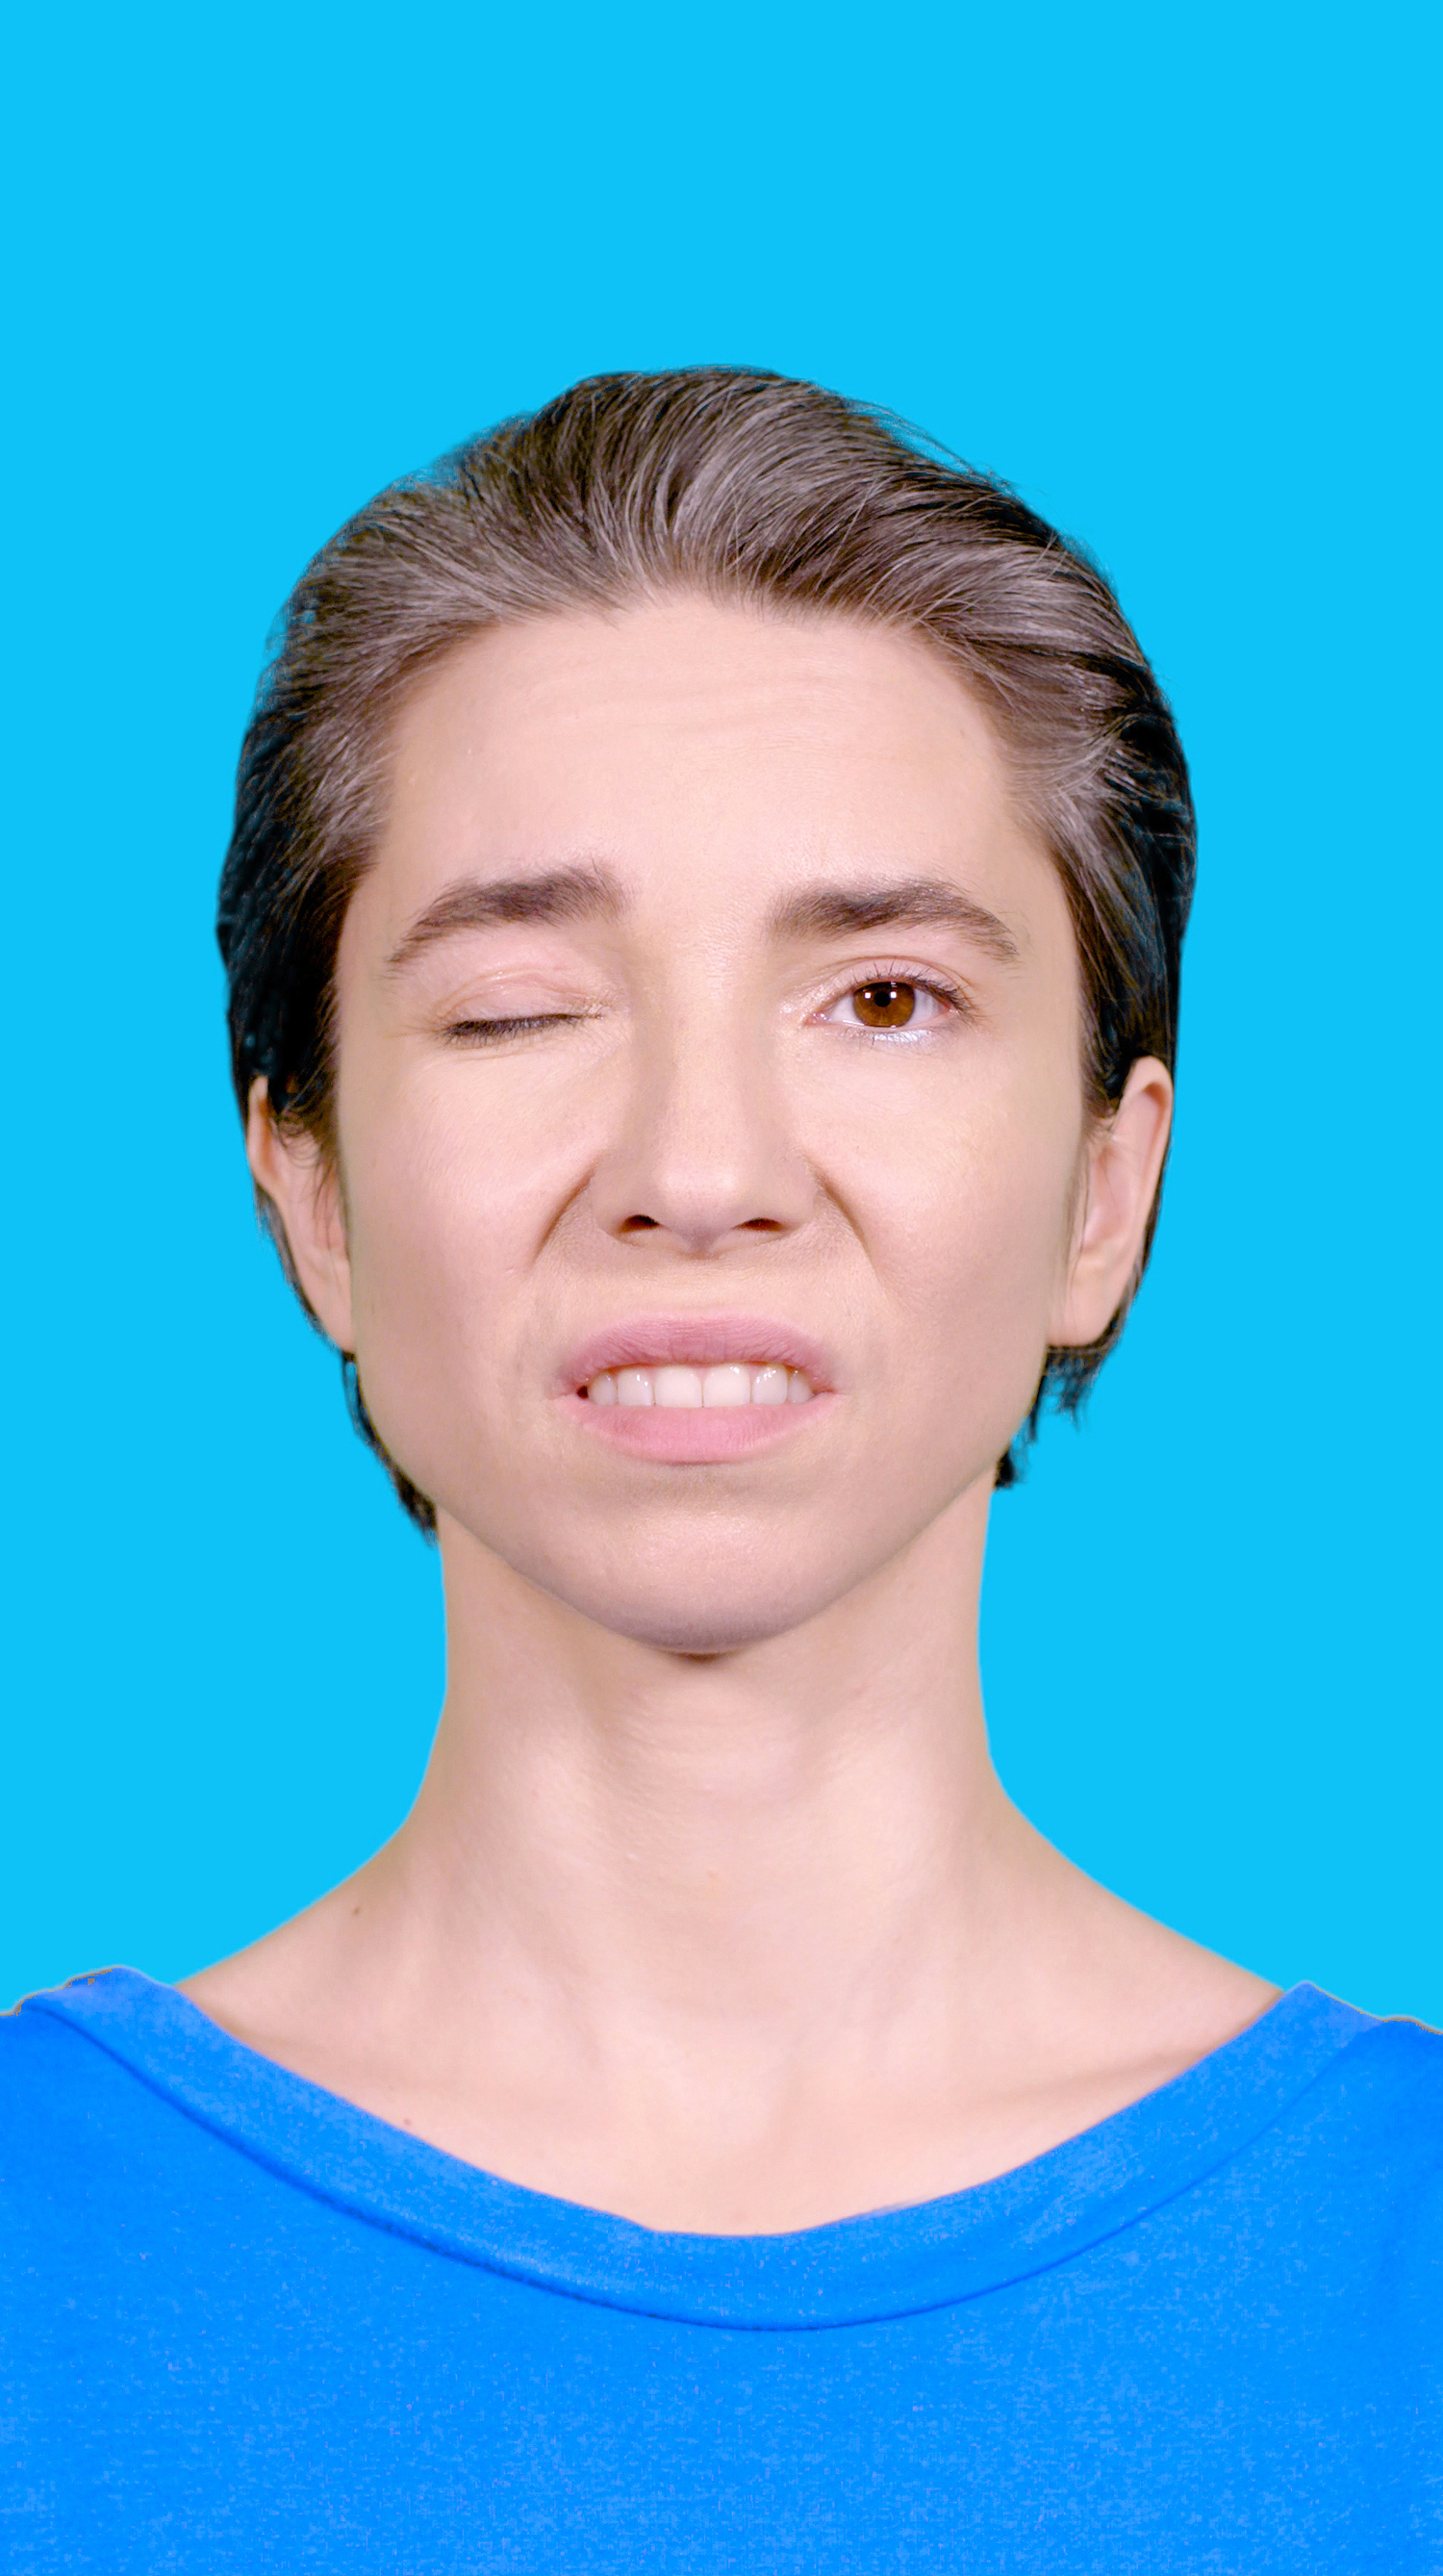 The screenshot shows a woman looking into the camera with one eye closed and one eye open.